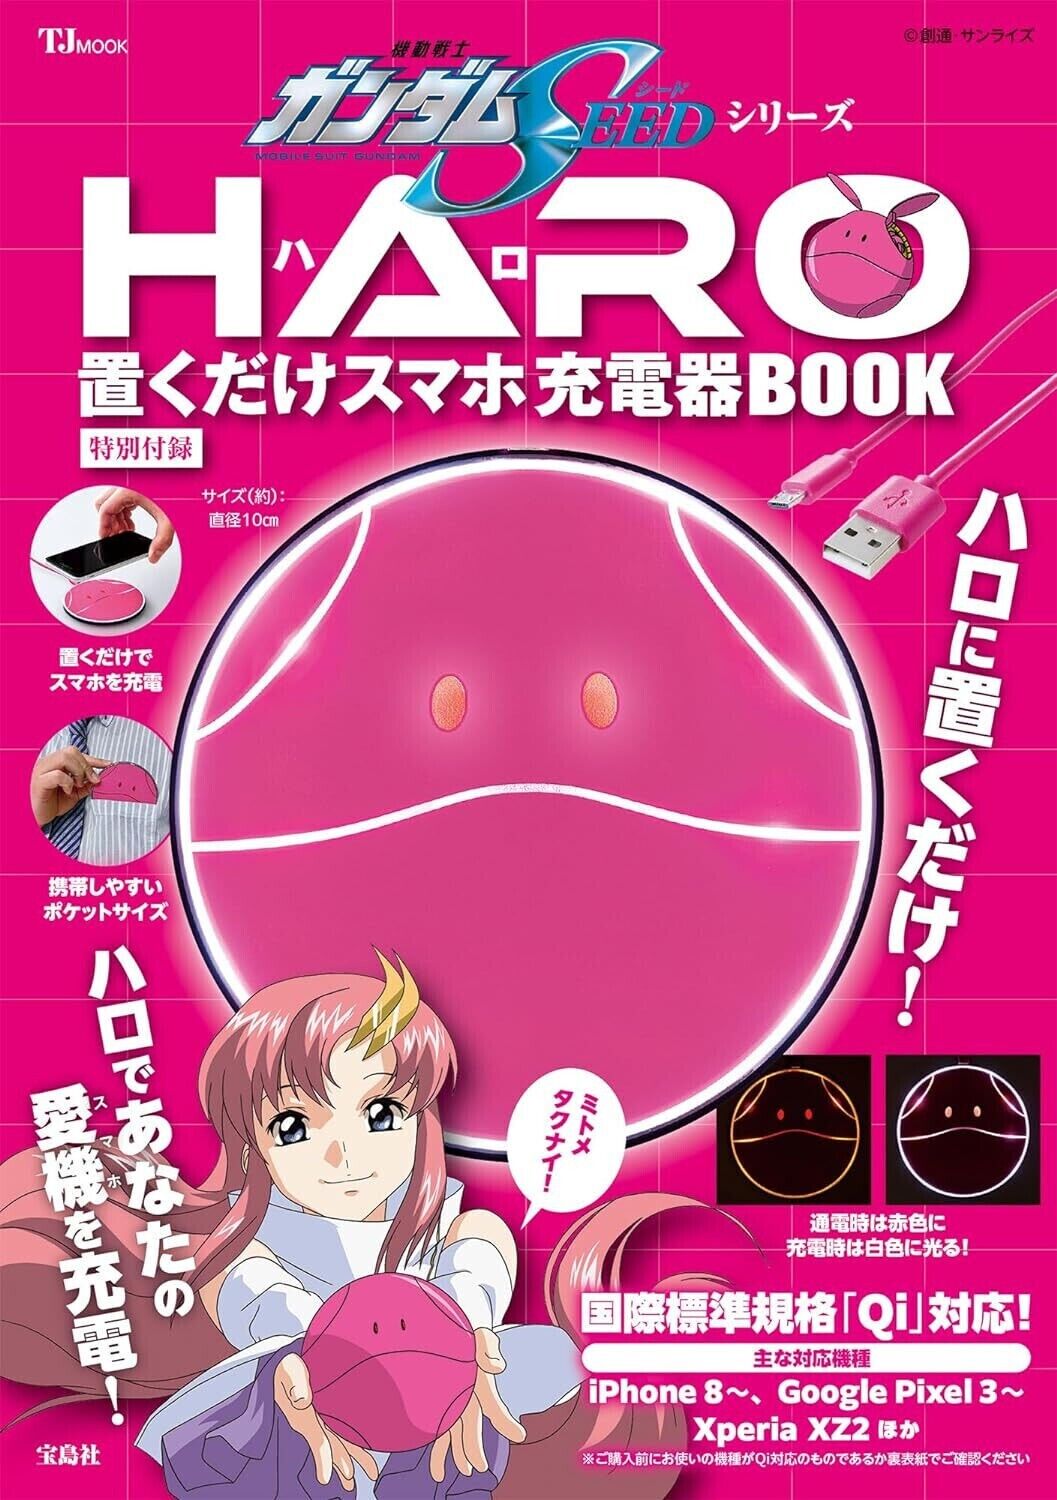 New HARO Charging Pad Smart Phone Mobile Gundam SEED Freedom FROM JAPAN Pink